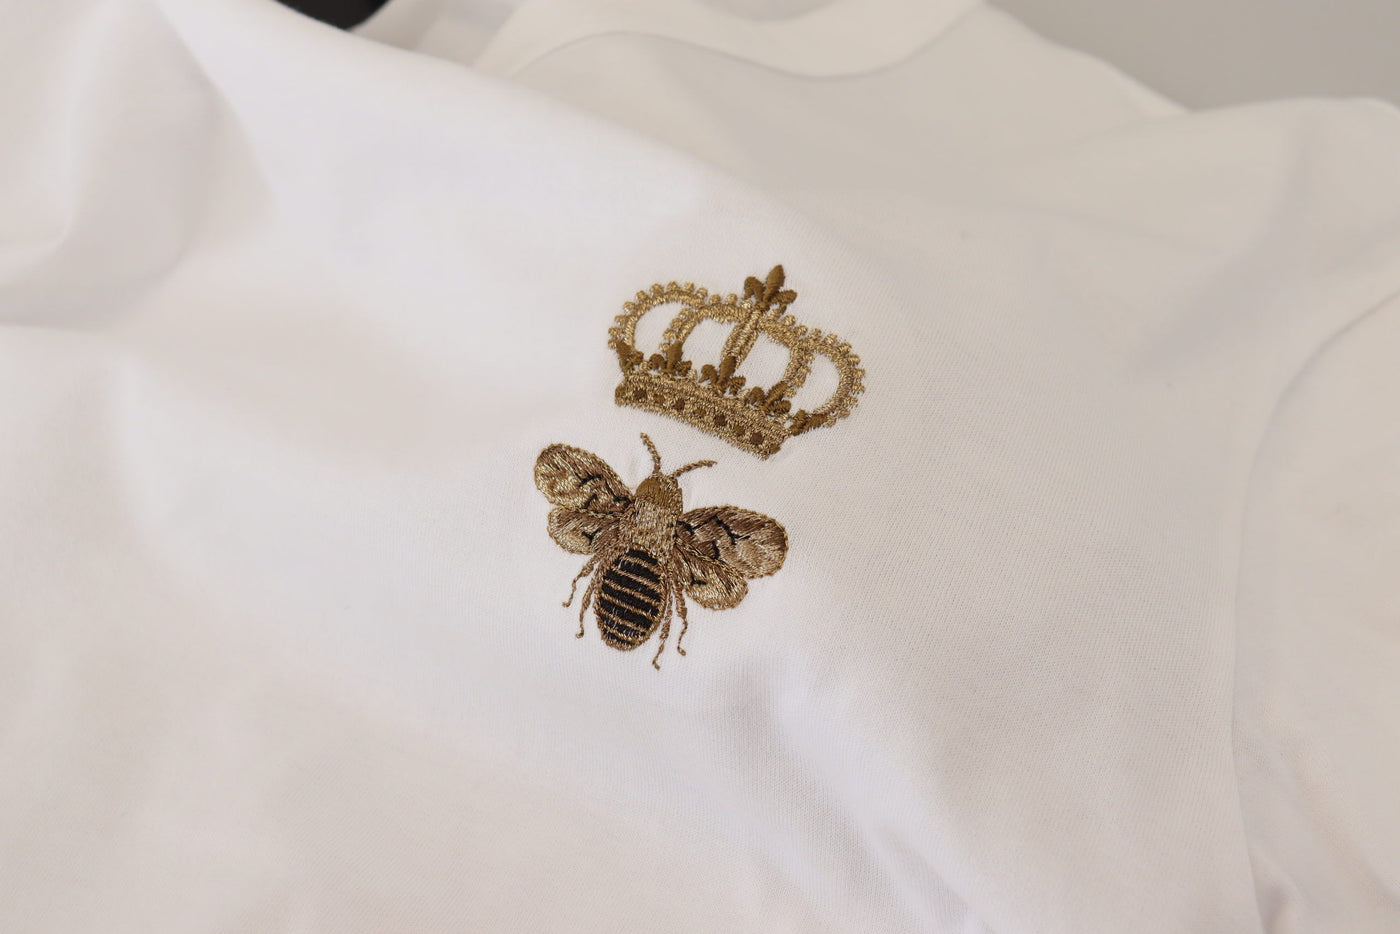 White Crown Bee Embroidered Crewneck T-shirt